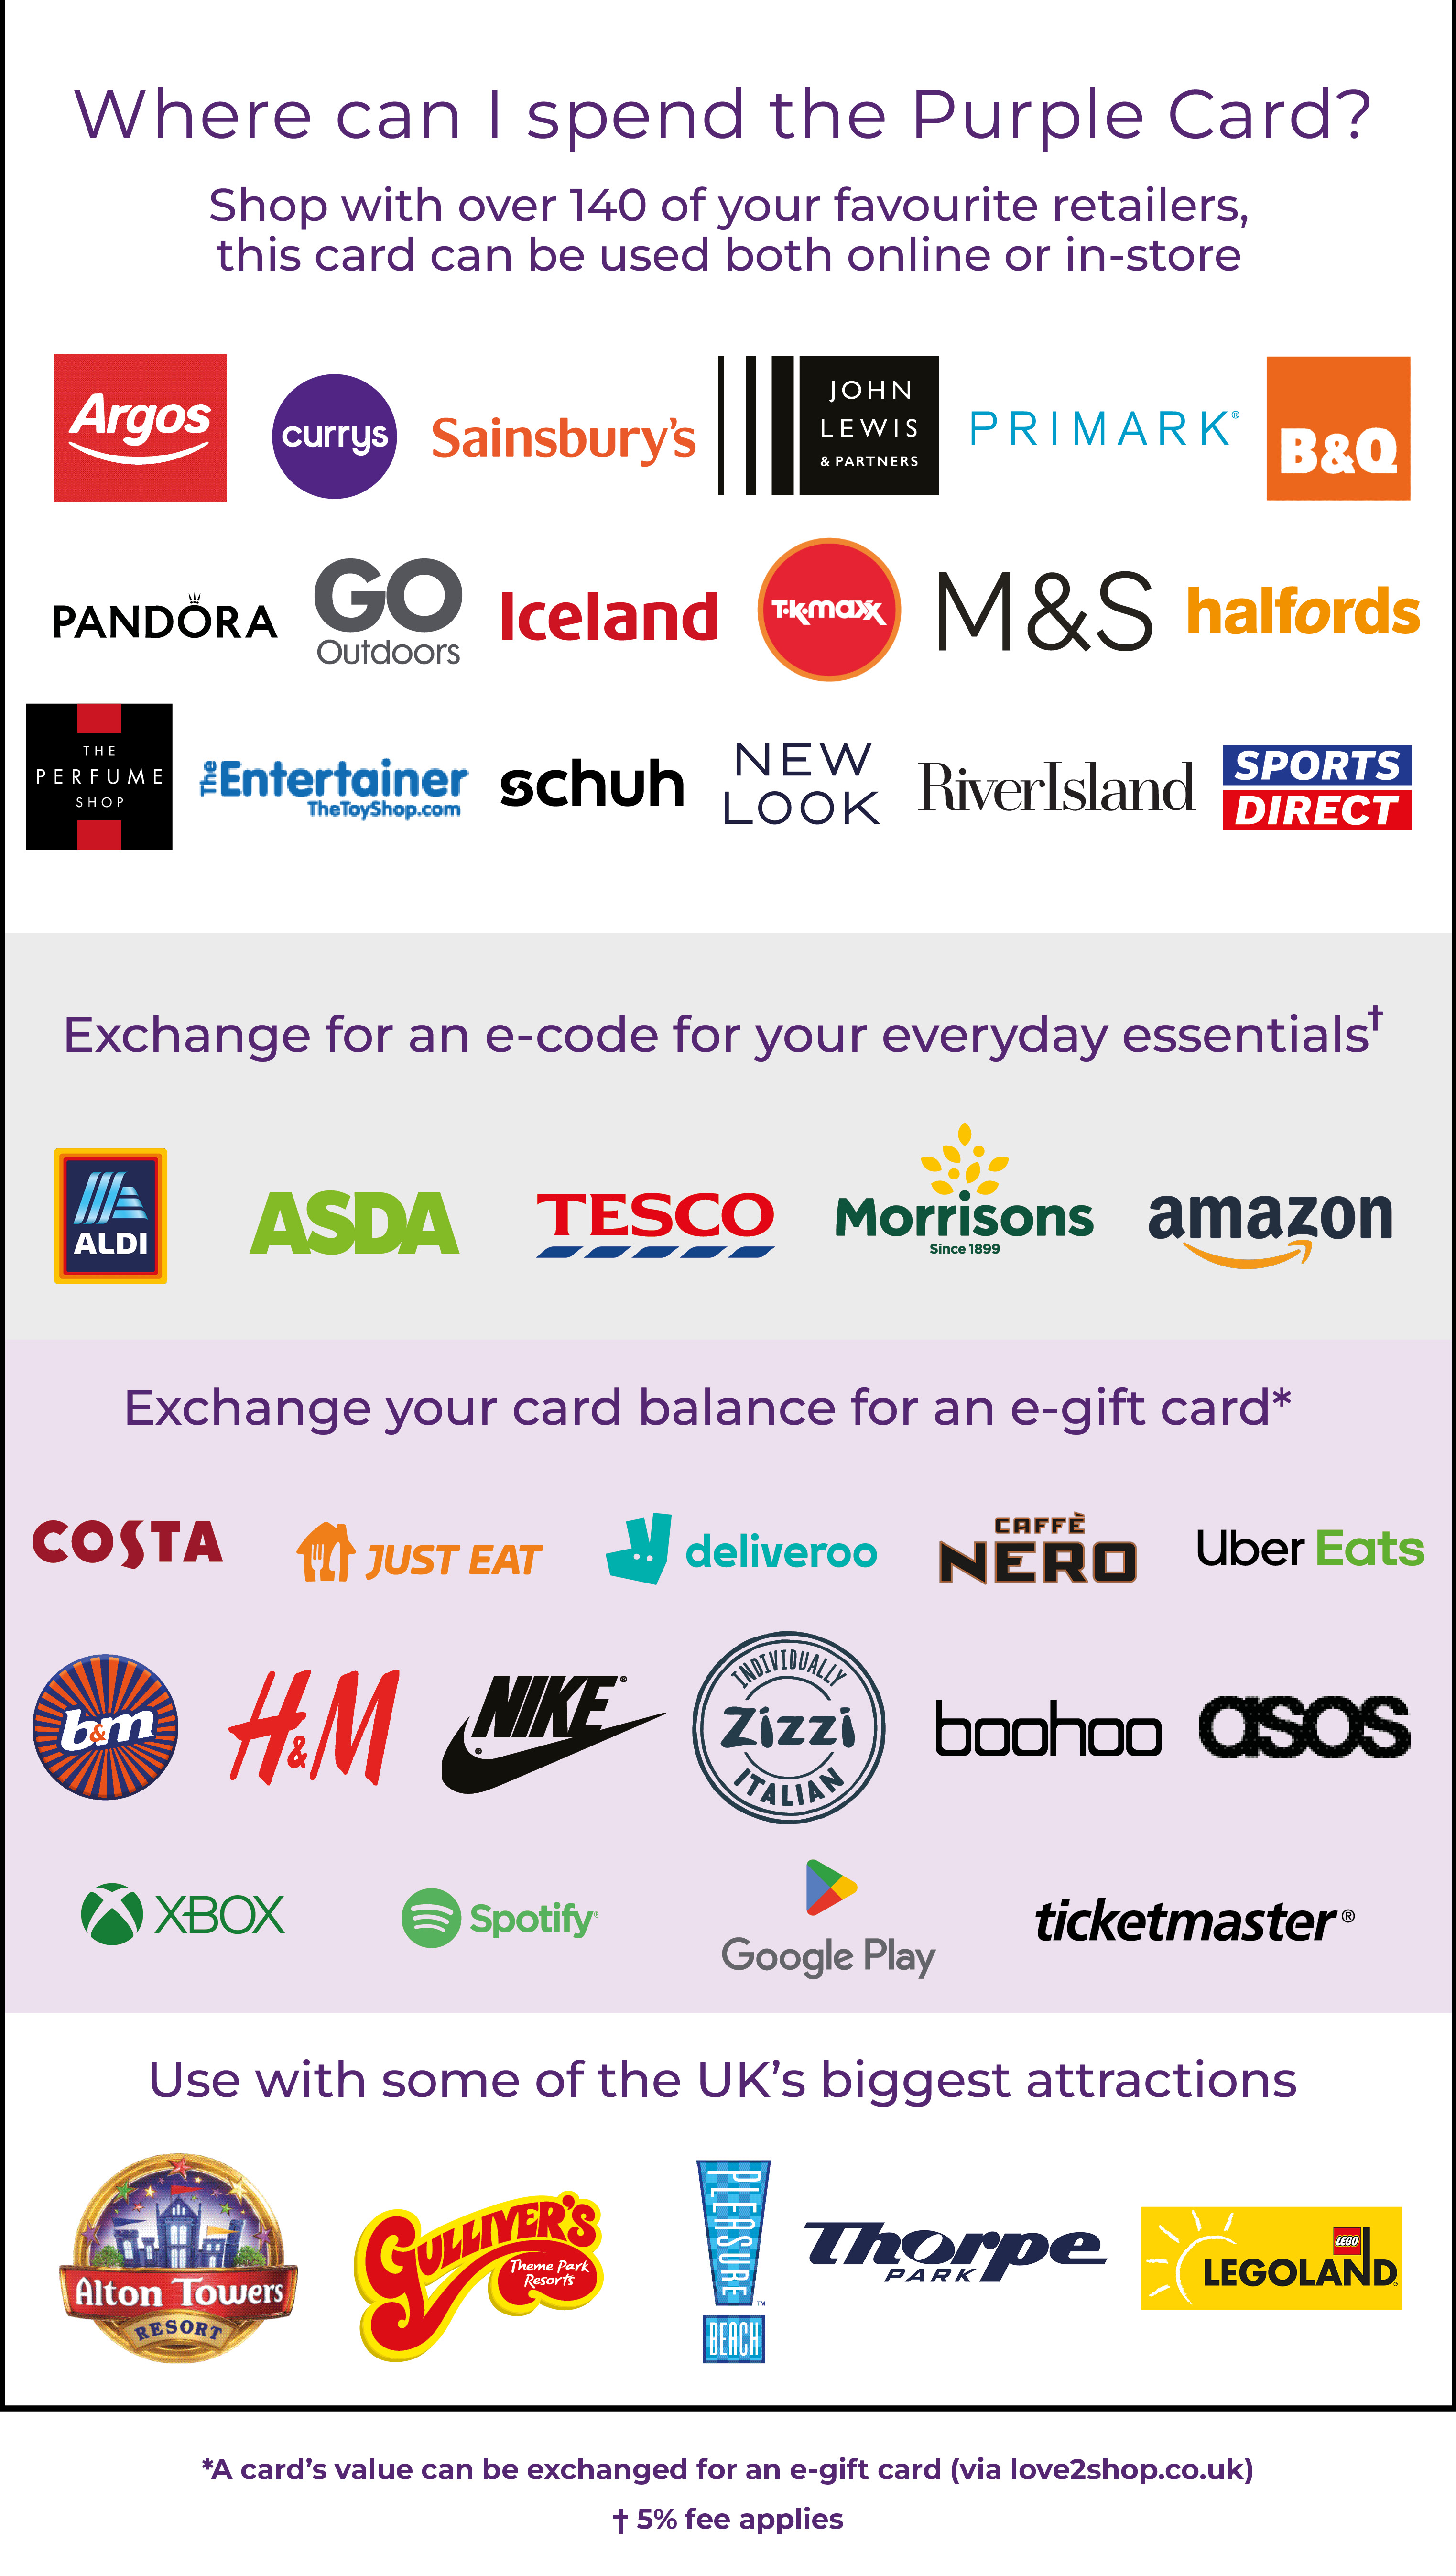 Logos from some included retailers - please see Find Out More section for details